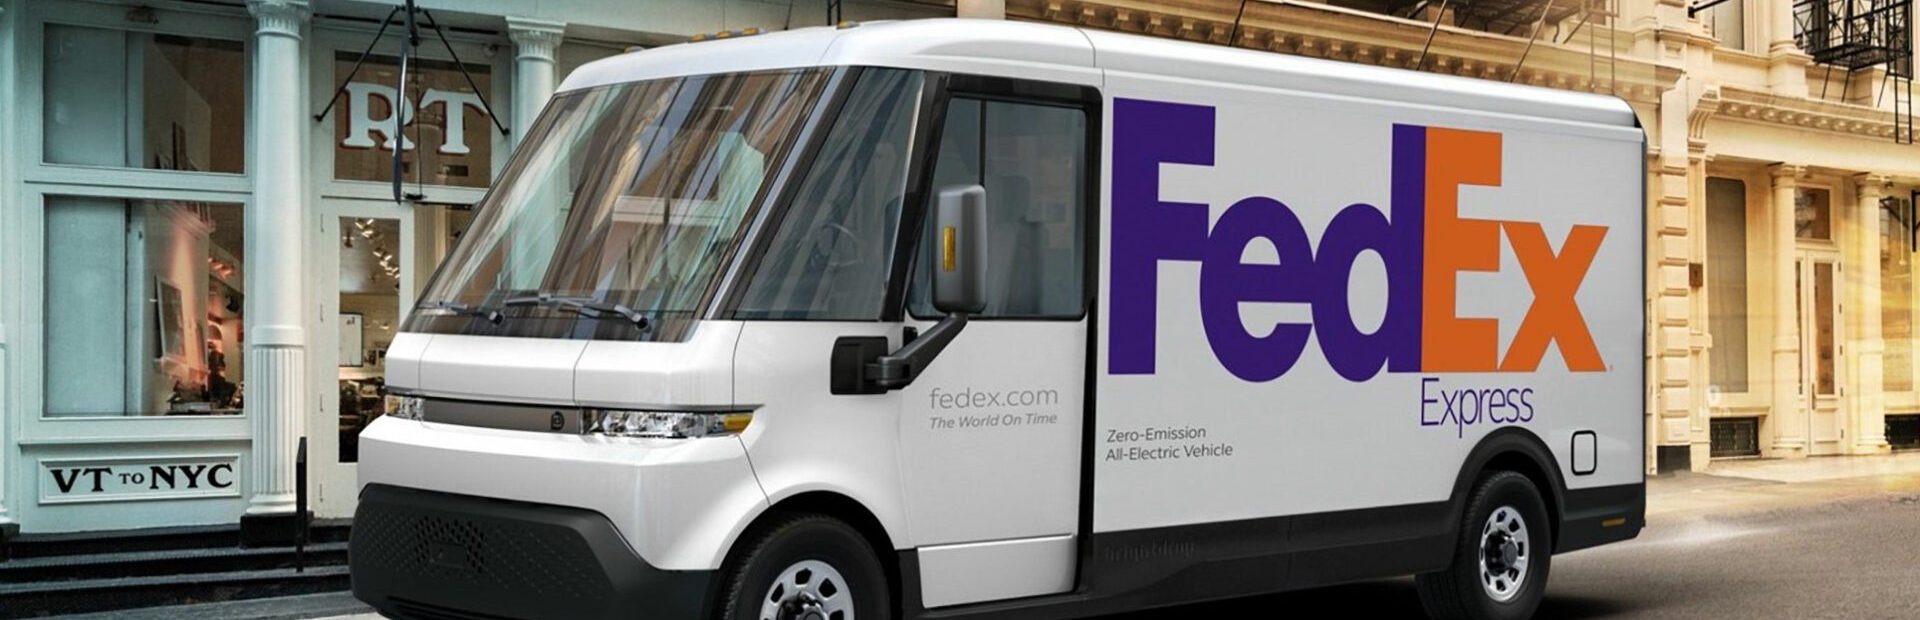 CIB-FedEx-delivers-on-decarbonisation-and-diversity